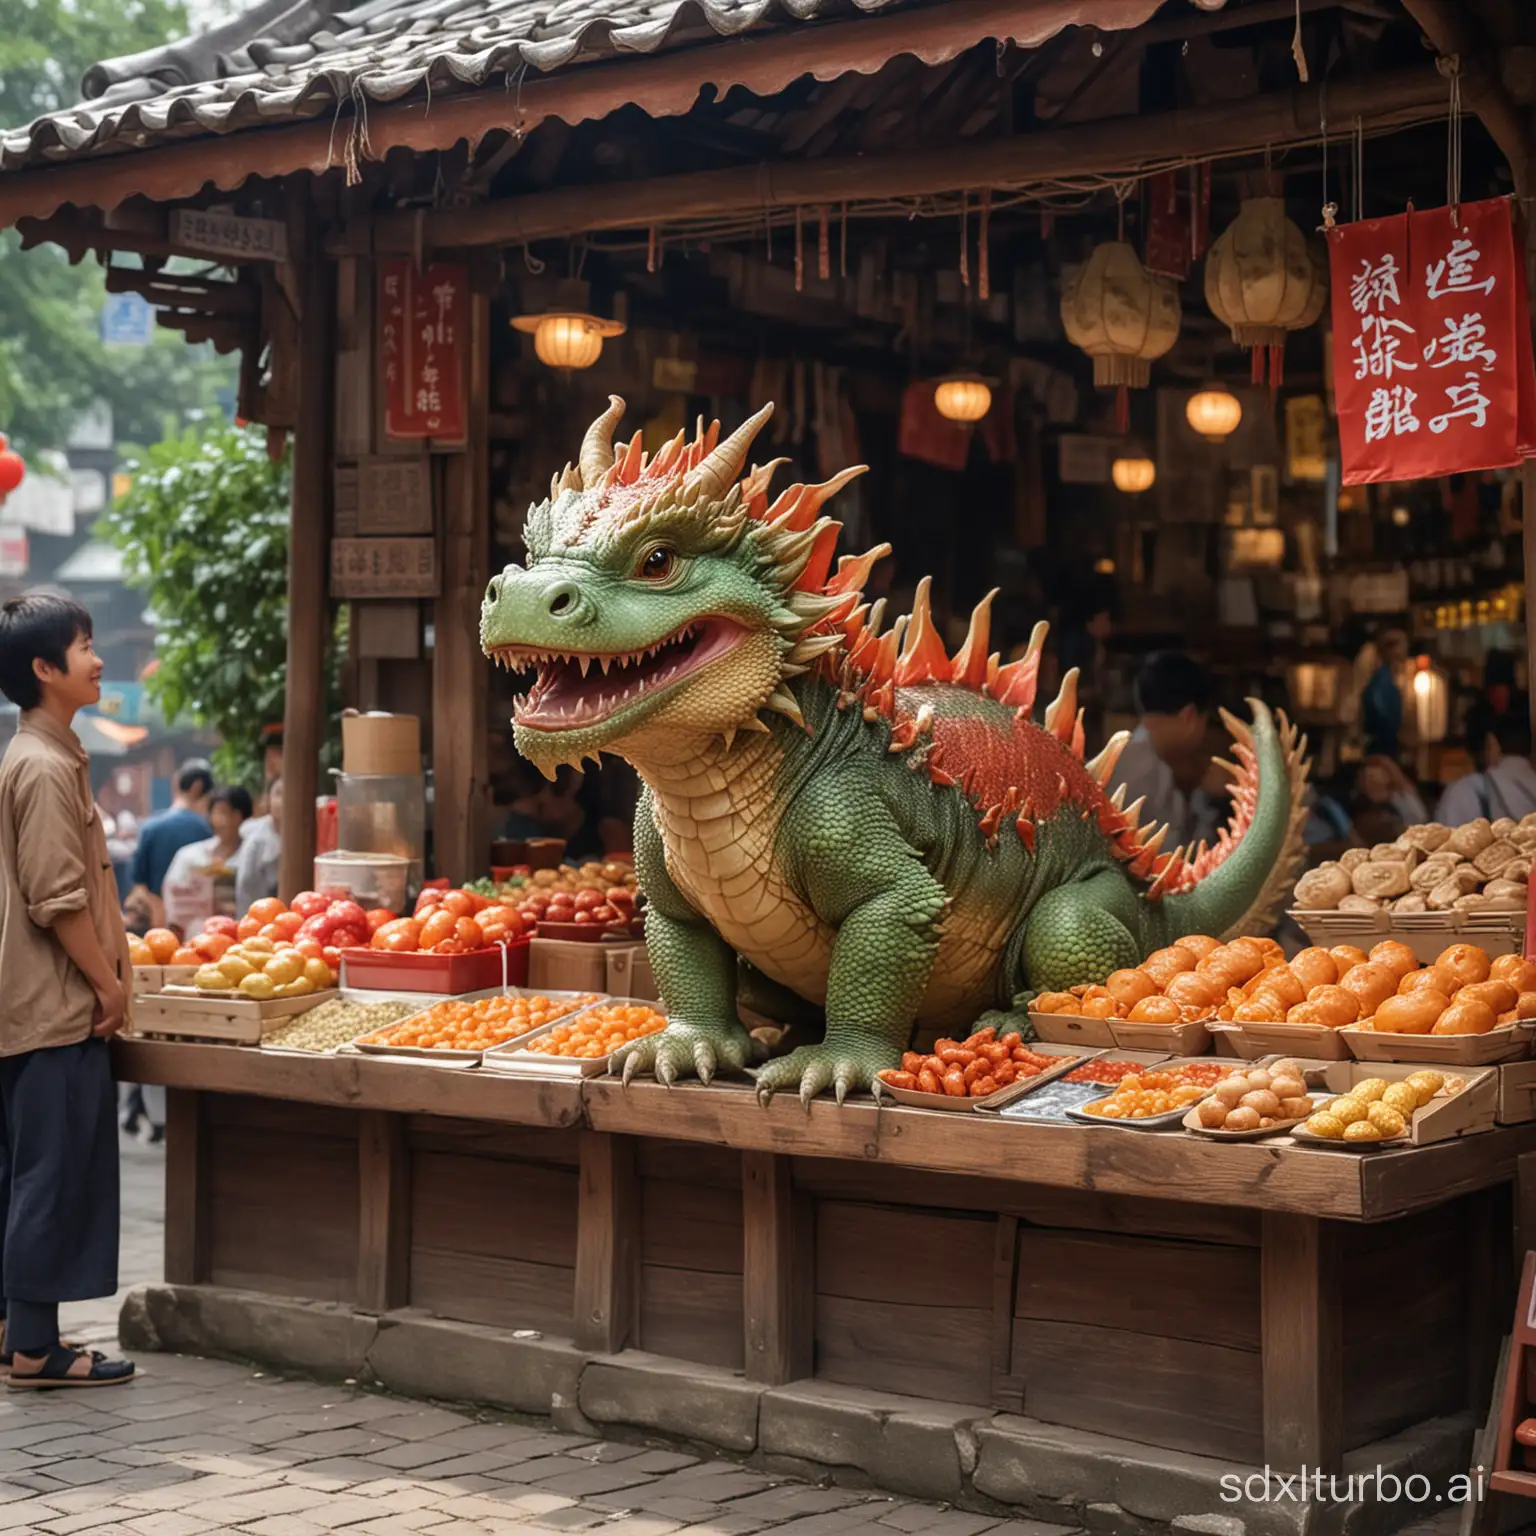 Adorable-Little-Dragon-Delights-Customers-at-Xiaolongs-Stall